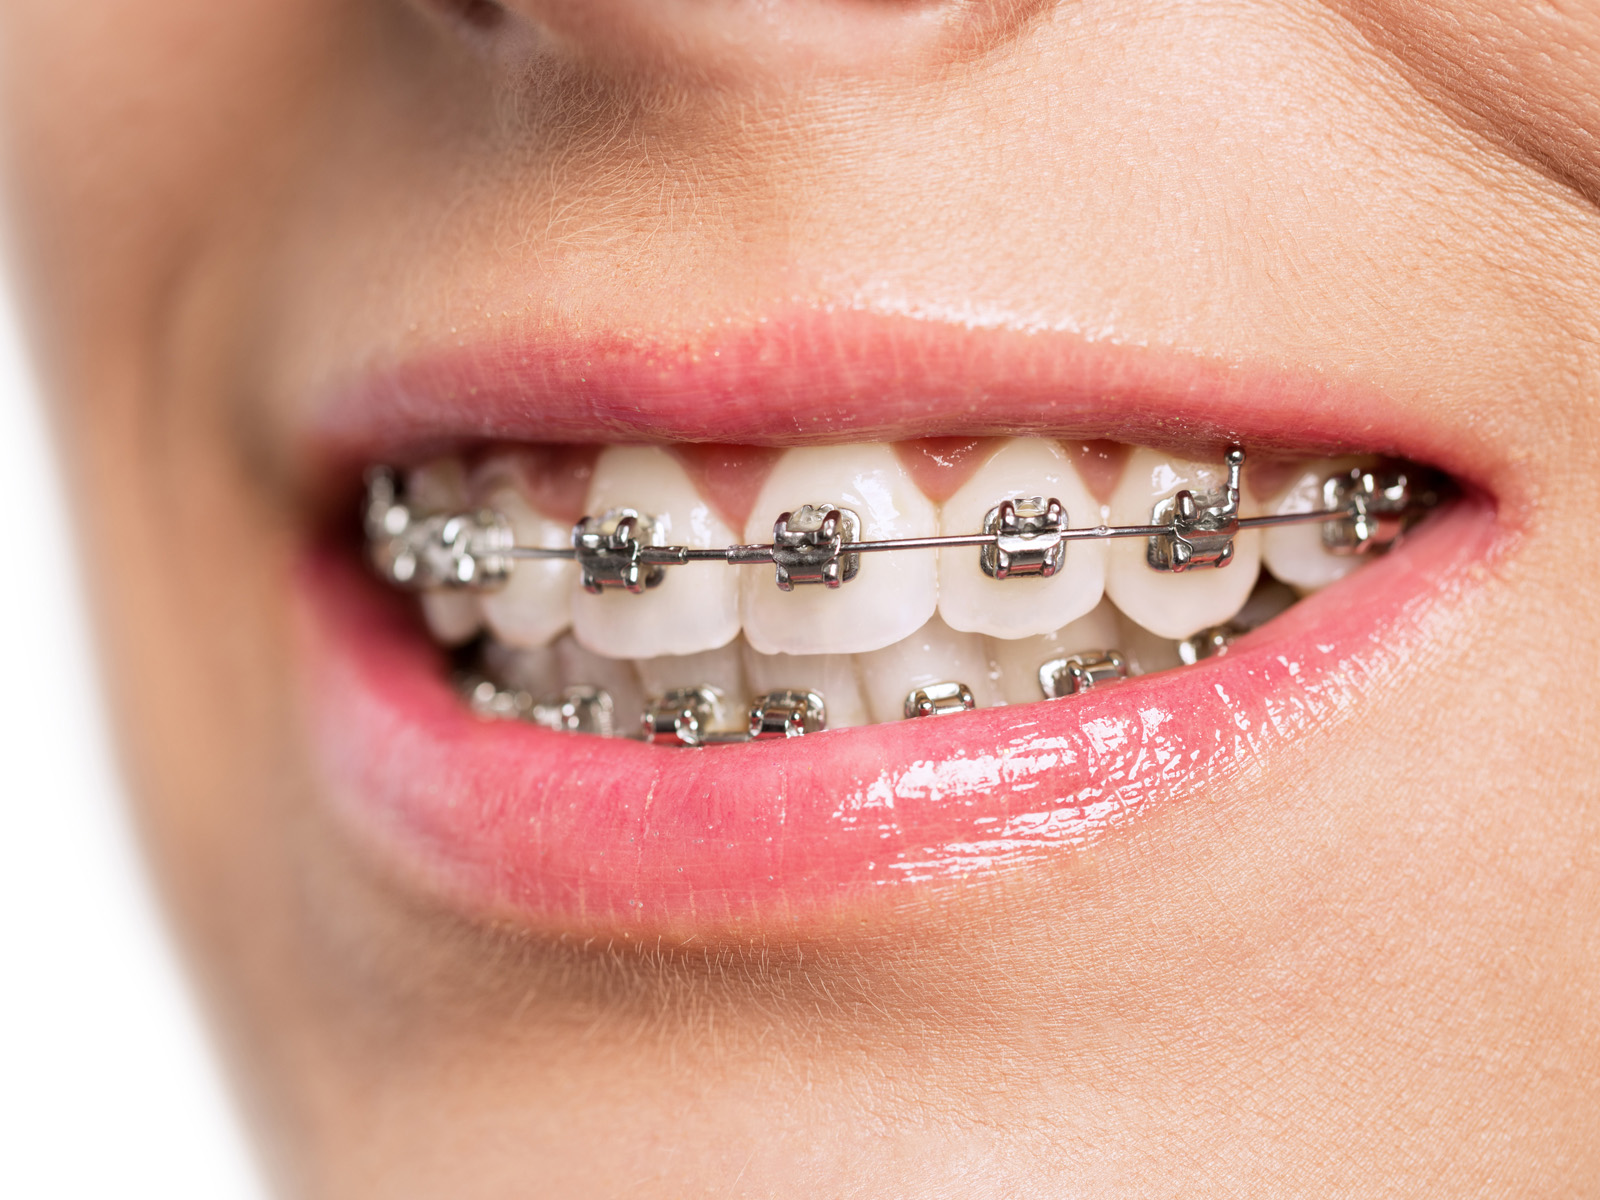 How to Avoid Dental Diseases While Wearing Braces